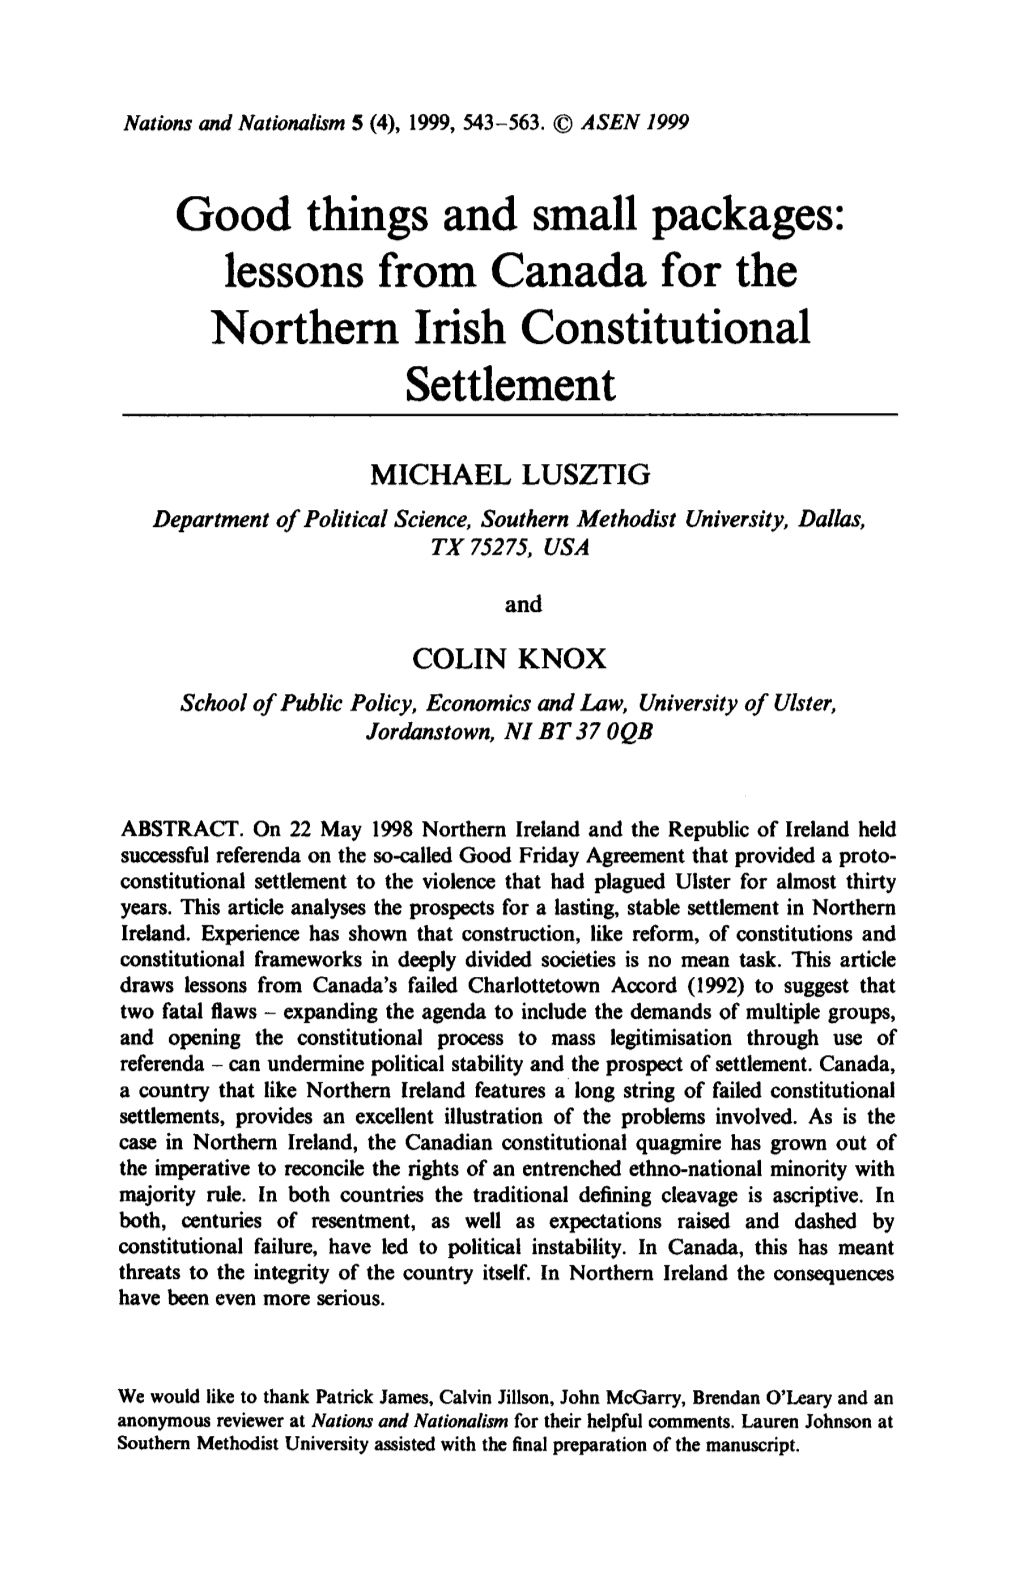 Lessons from Canada for the Northern Irish Constitutional Settlement